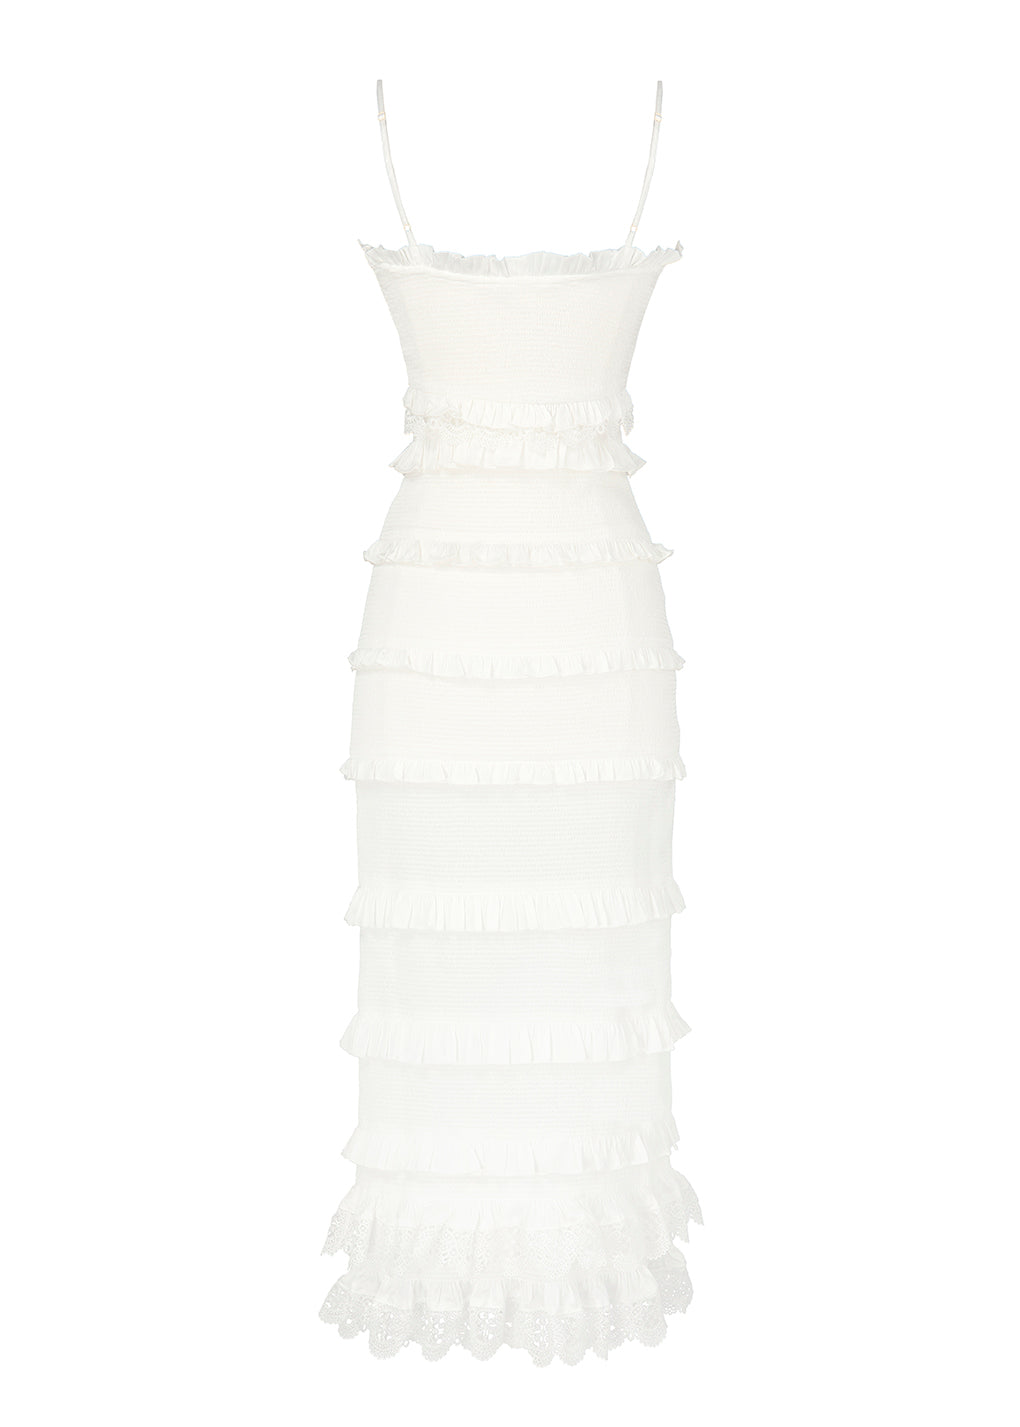 The Narcisse Dress in White